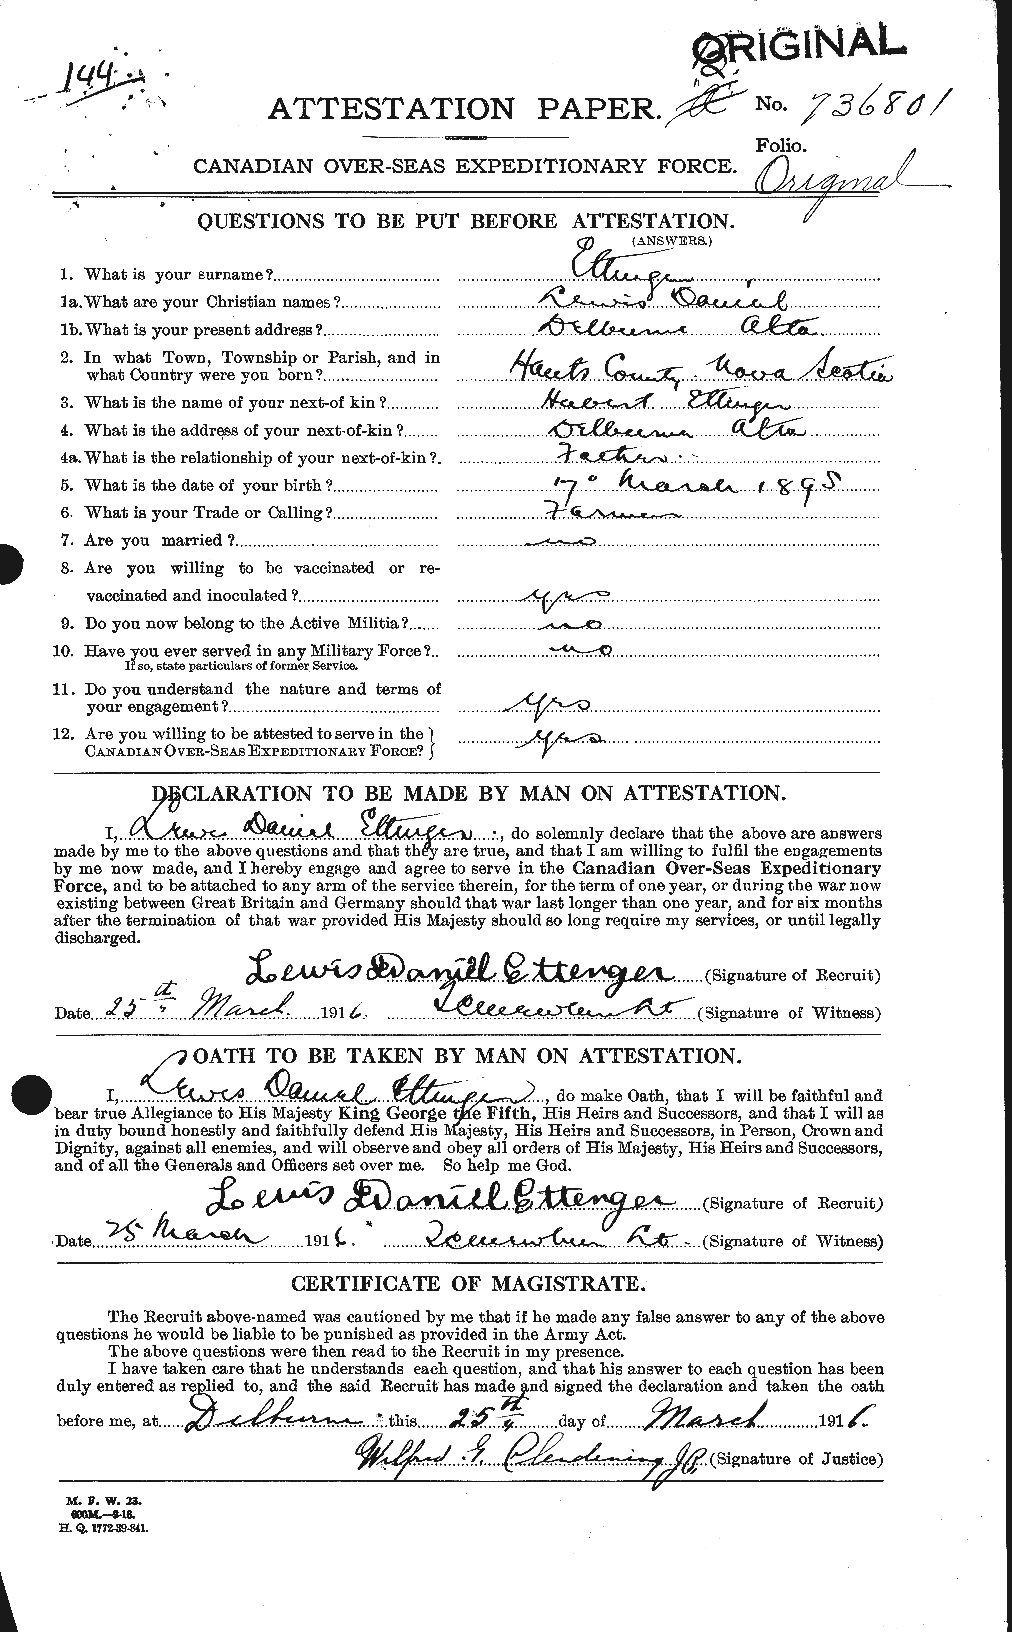 Personnel Records of the First World War - CEF 314771a